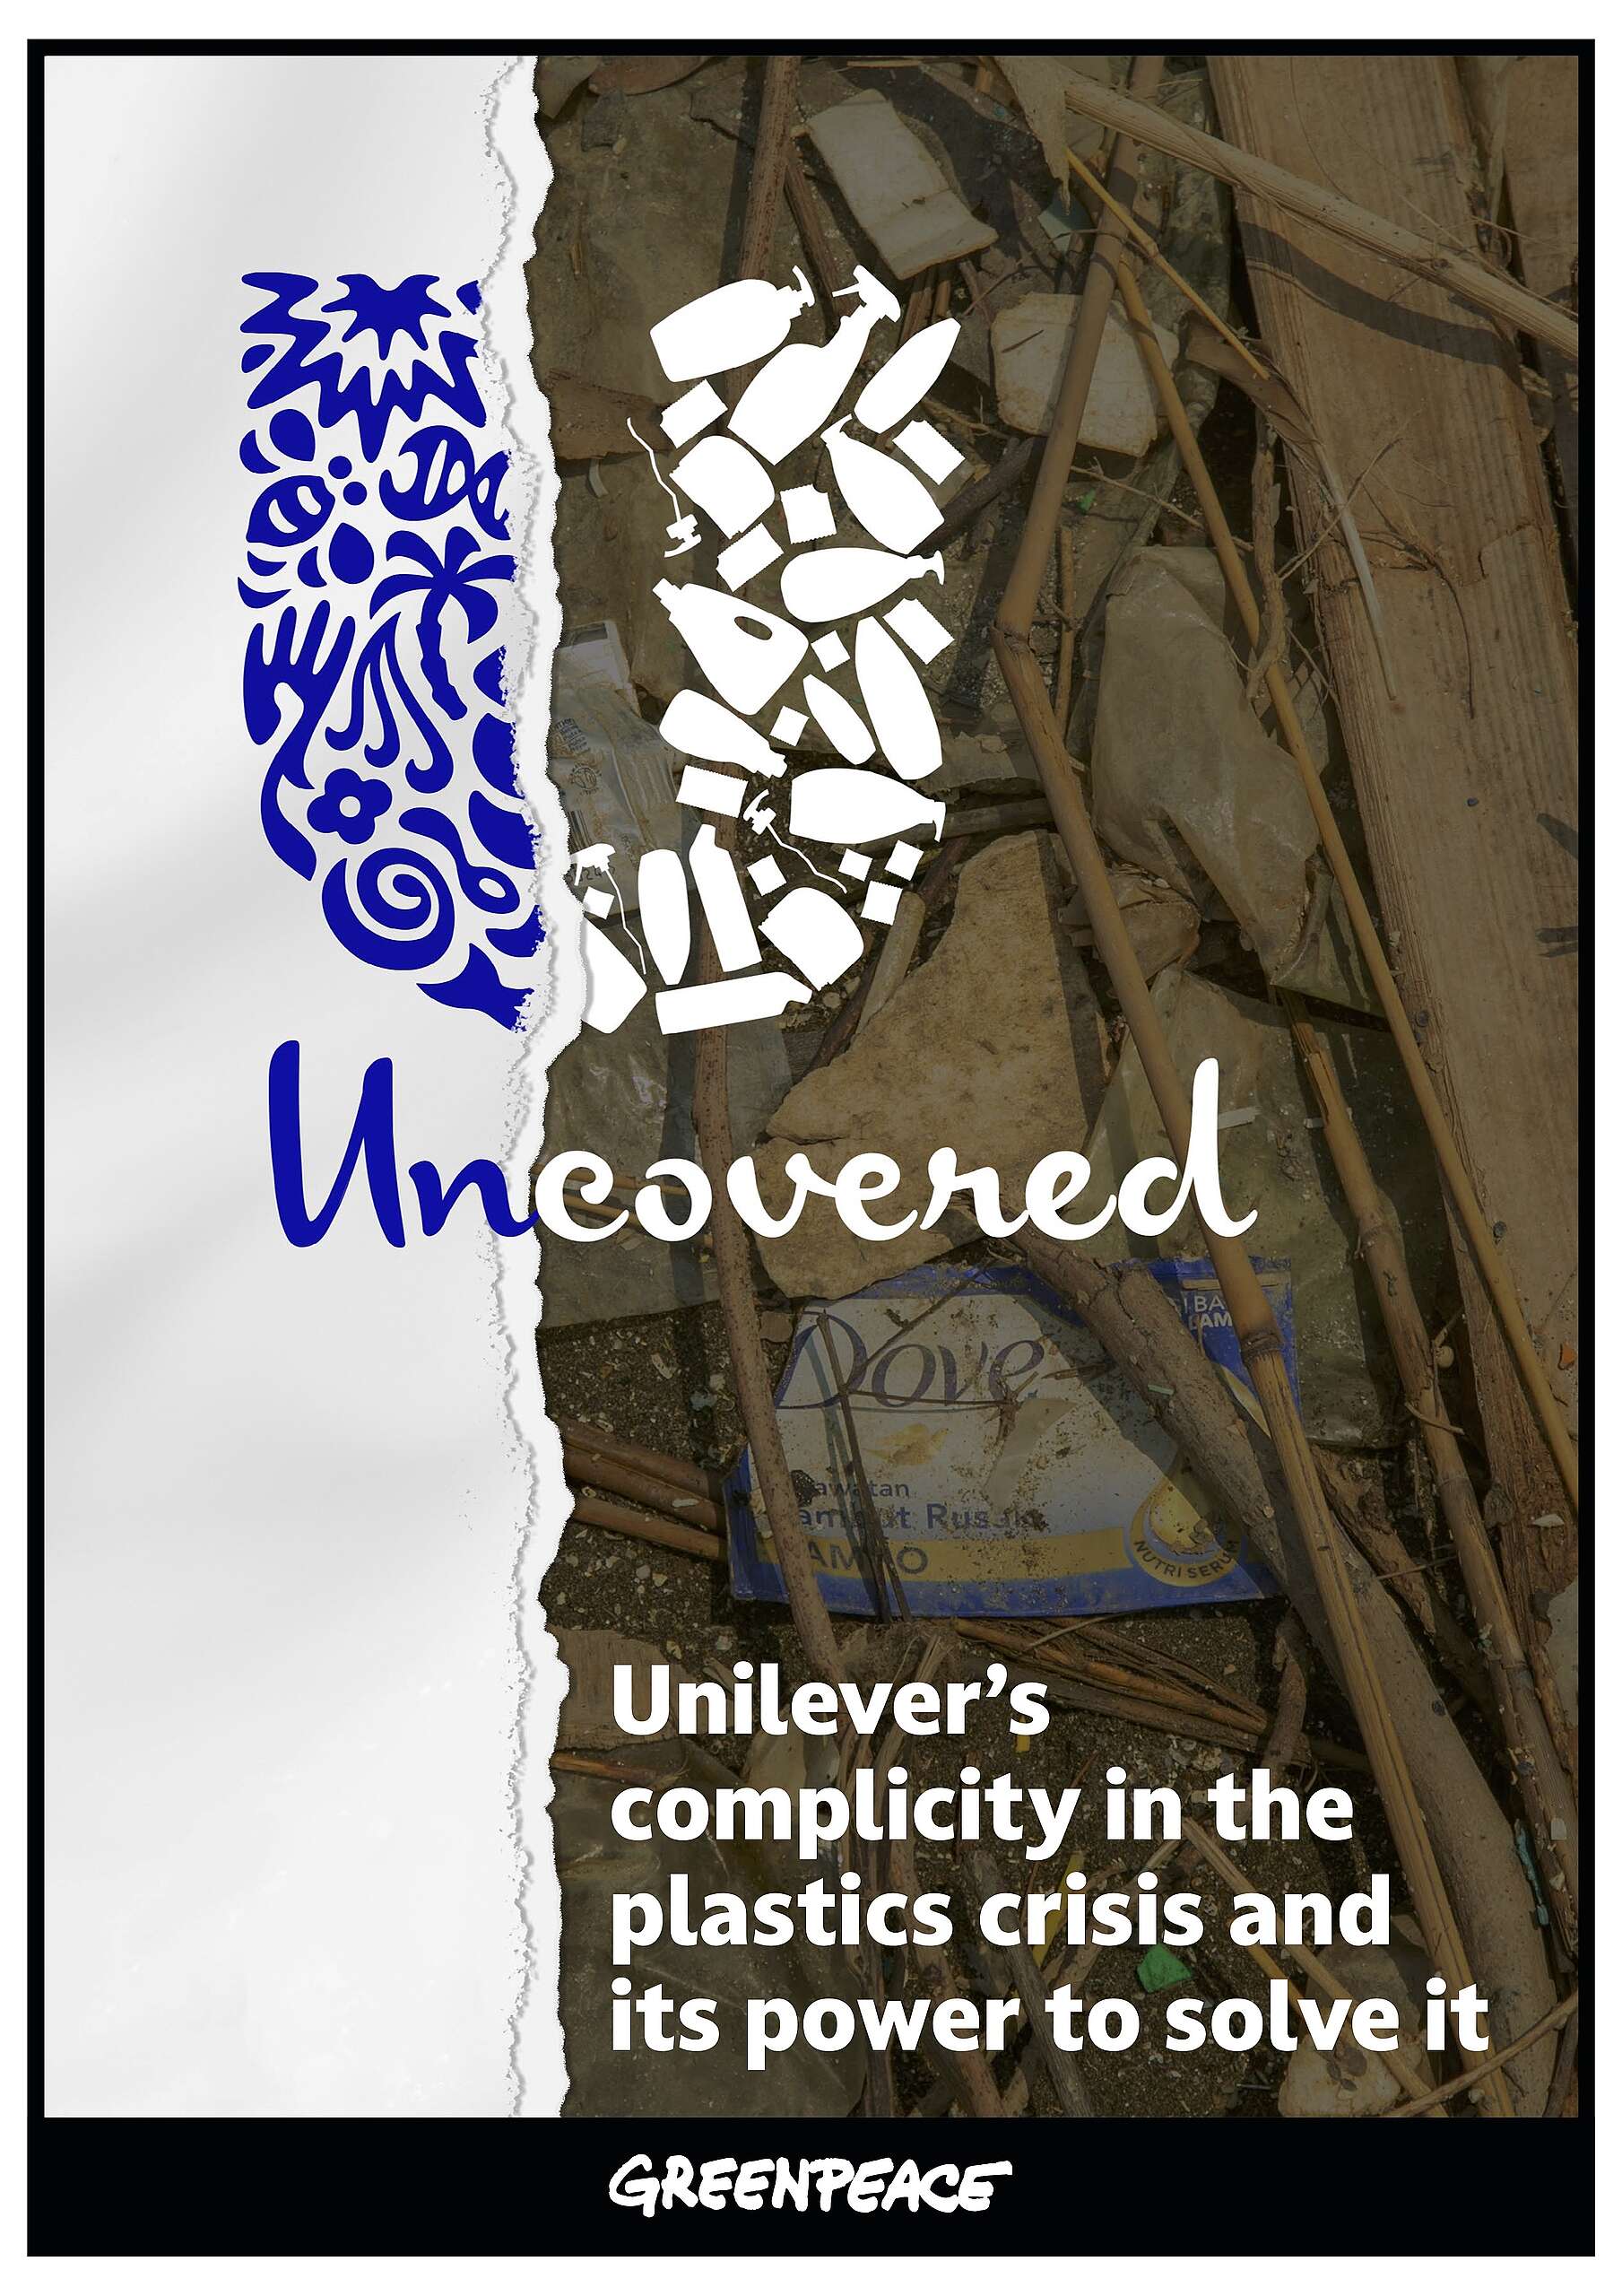 Cover of report - Uncovered: Unilever's complicity in the plastics crisis and its power to solve it